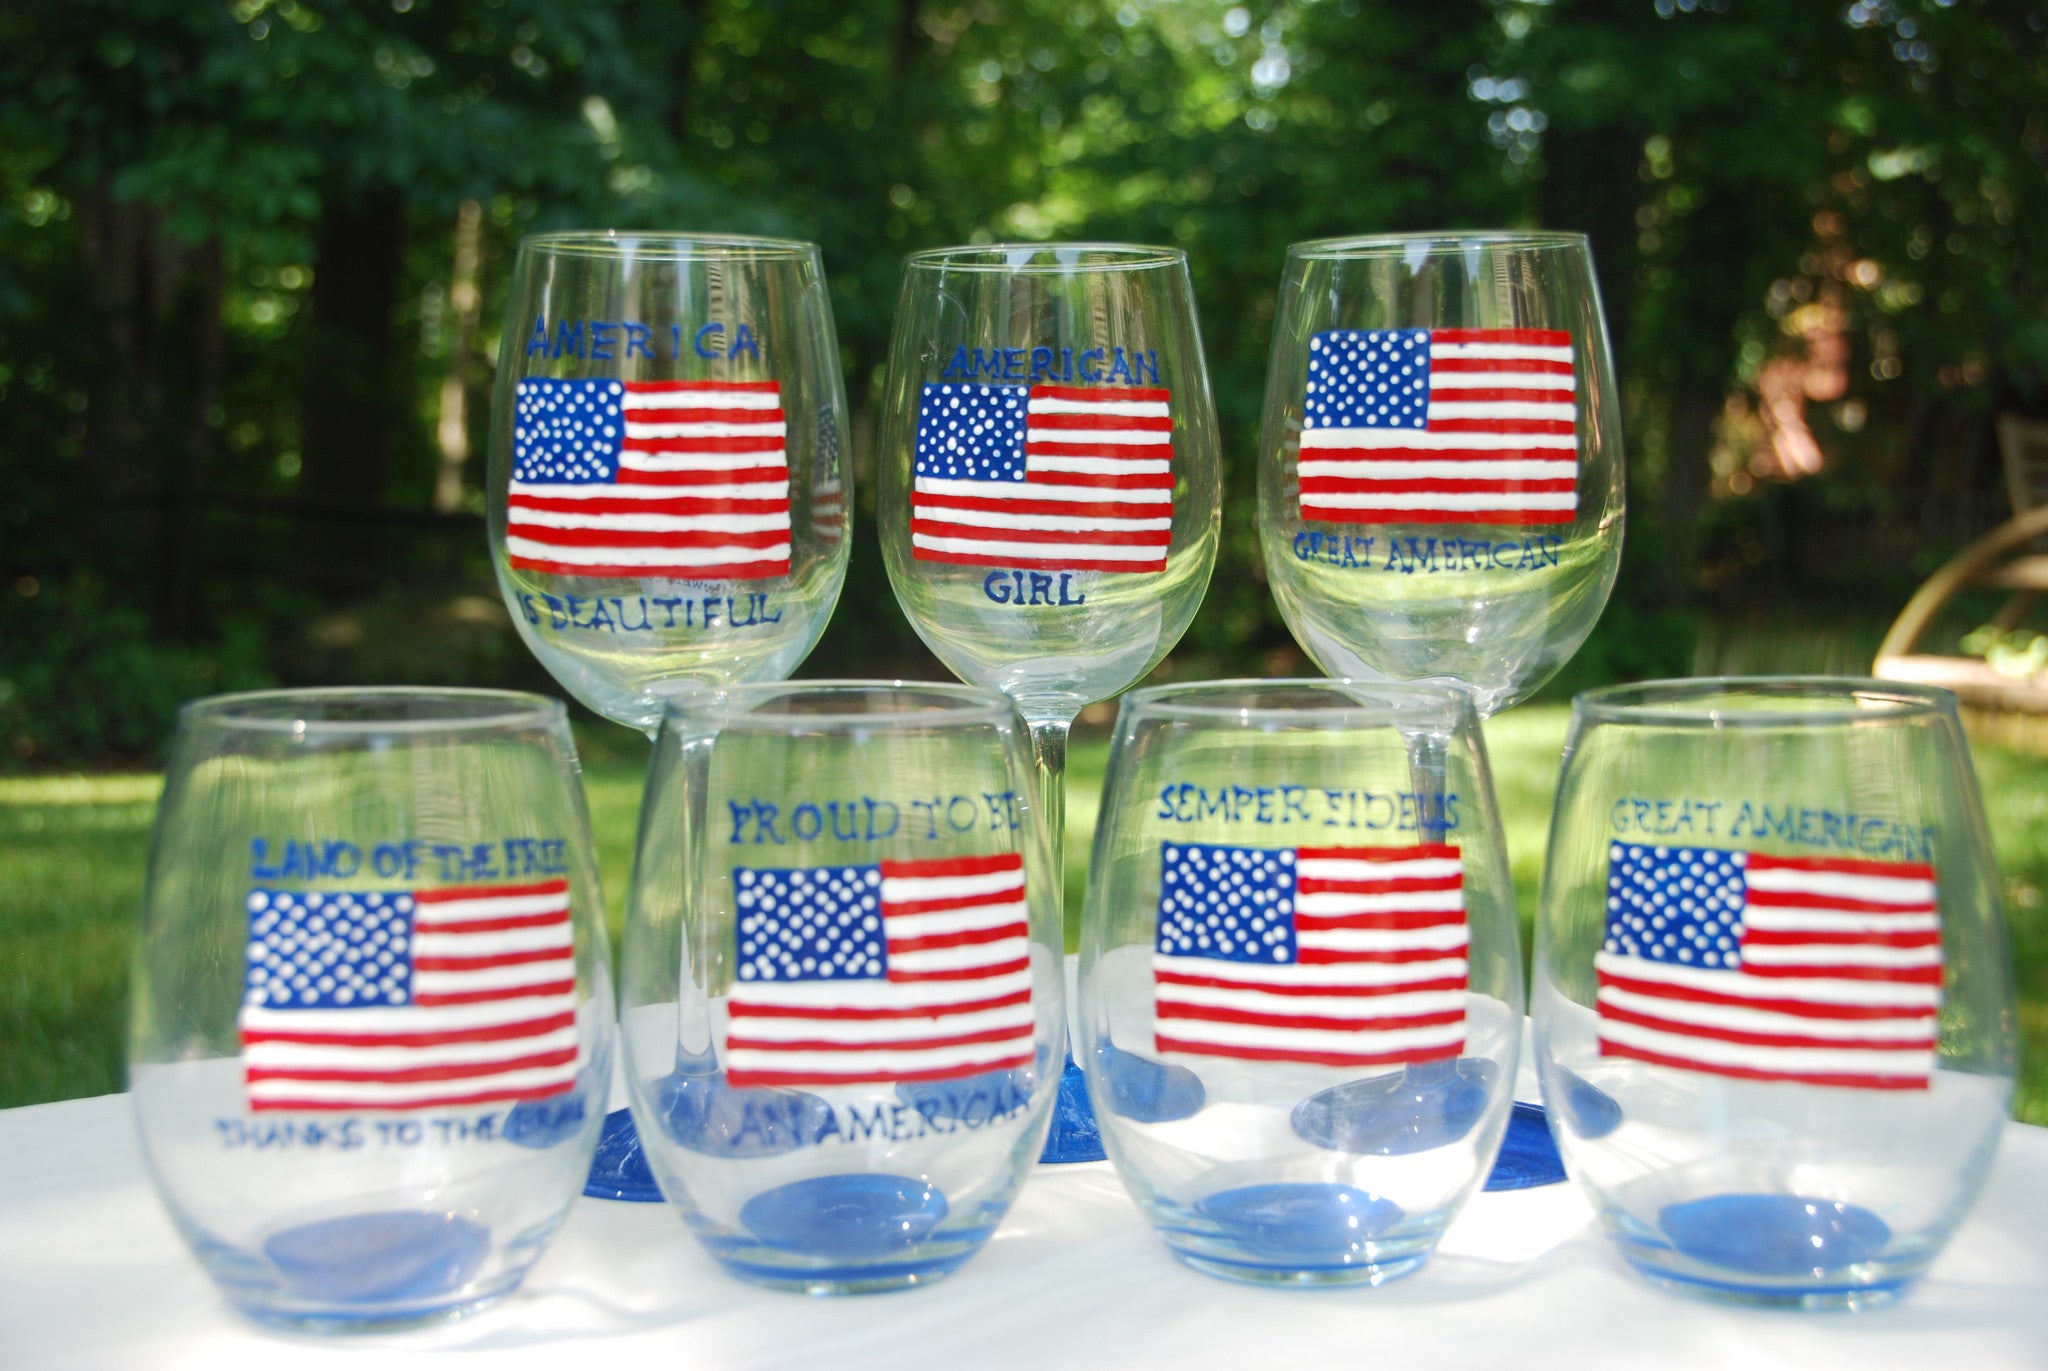 Stars & Stripes - Hand Painted, Personalized Glassware